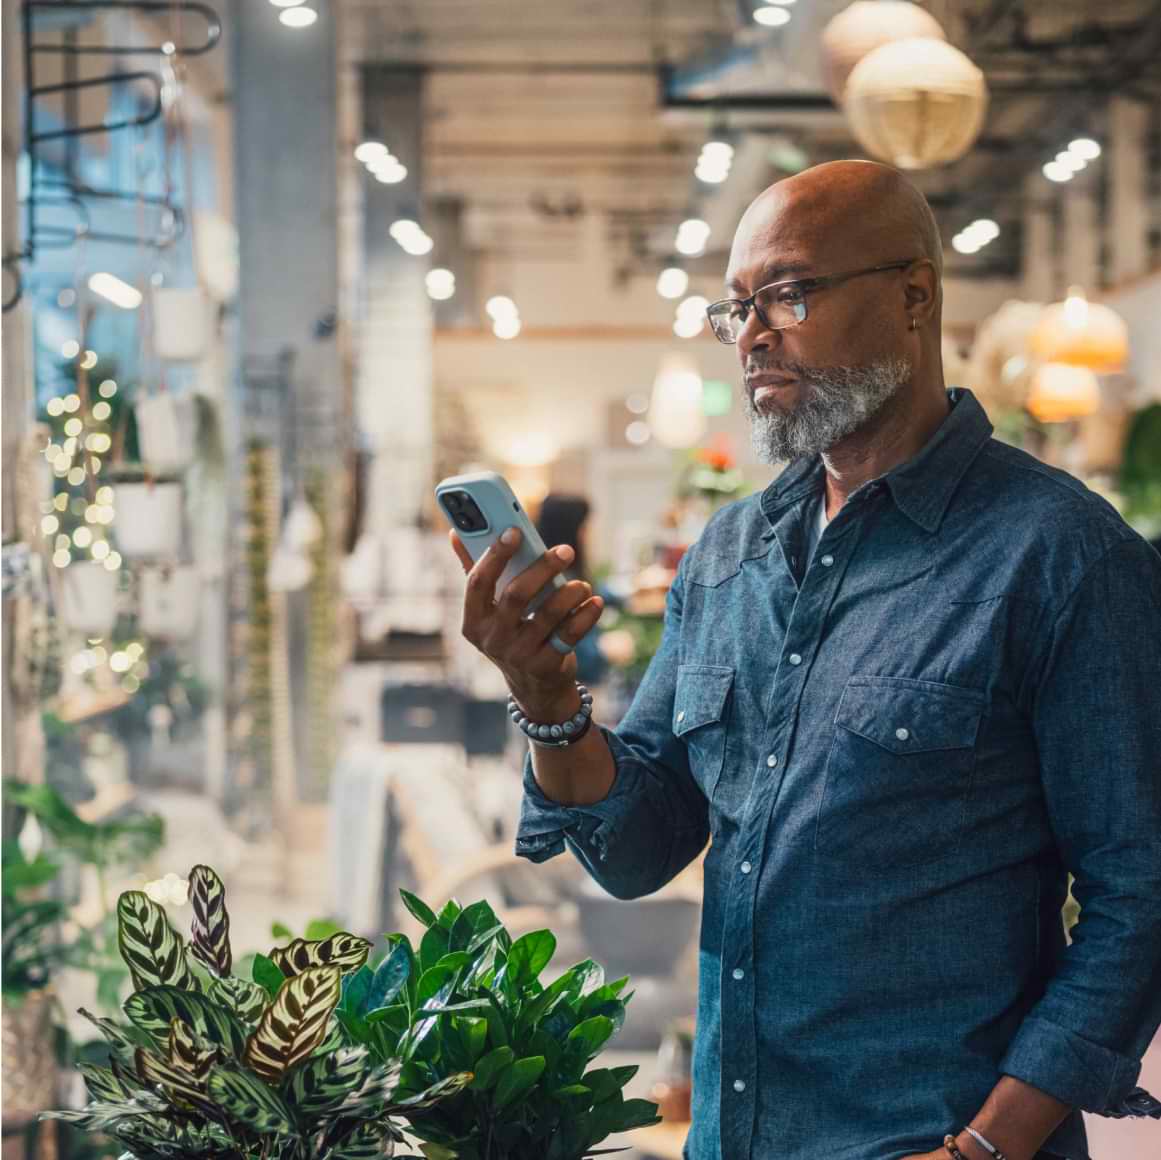 The owner of a plant shop looks at his business’s cash flow on his mobile device.